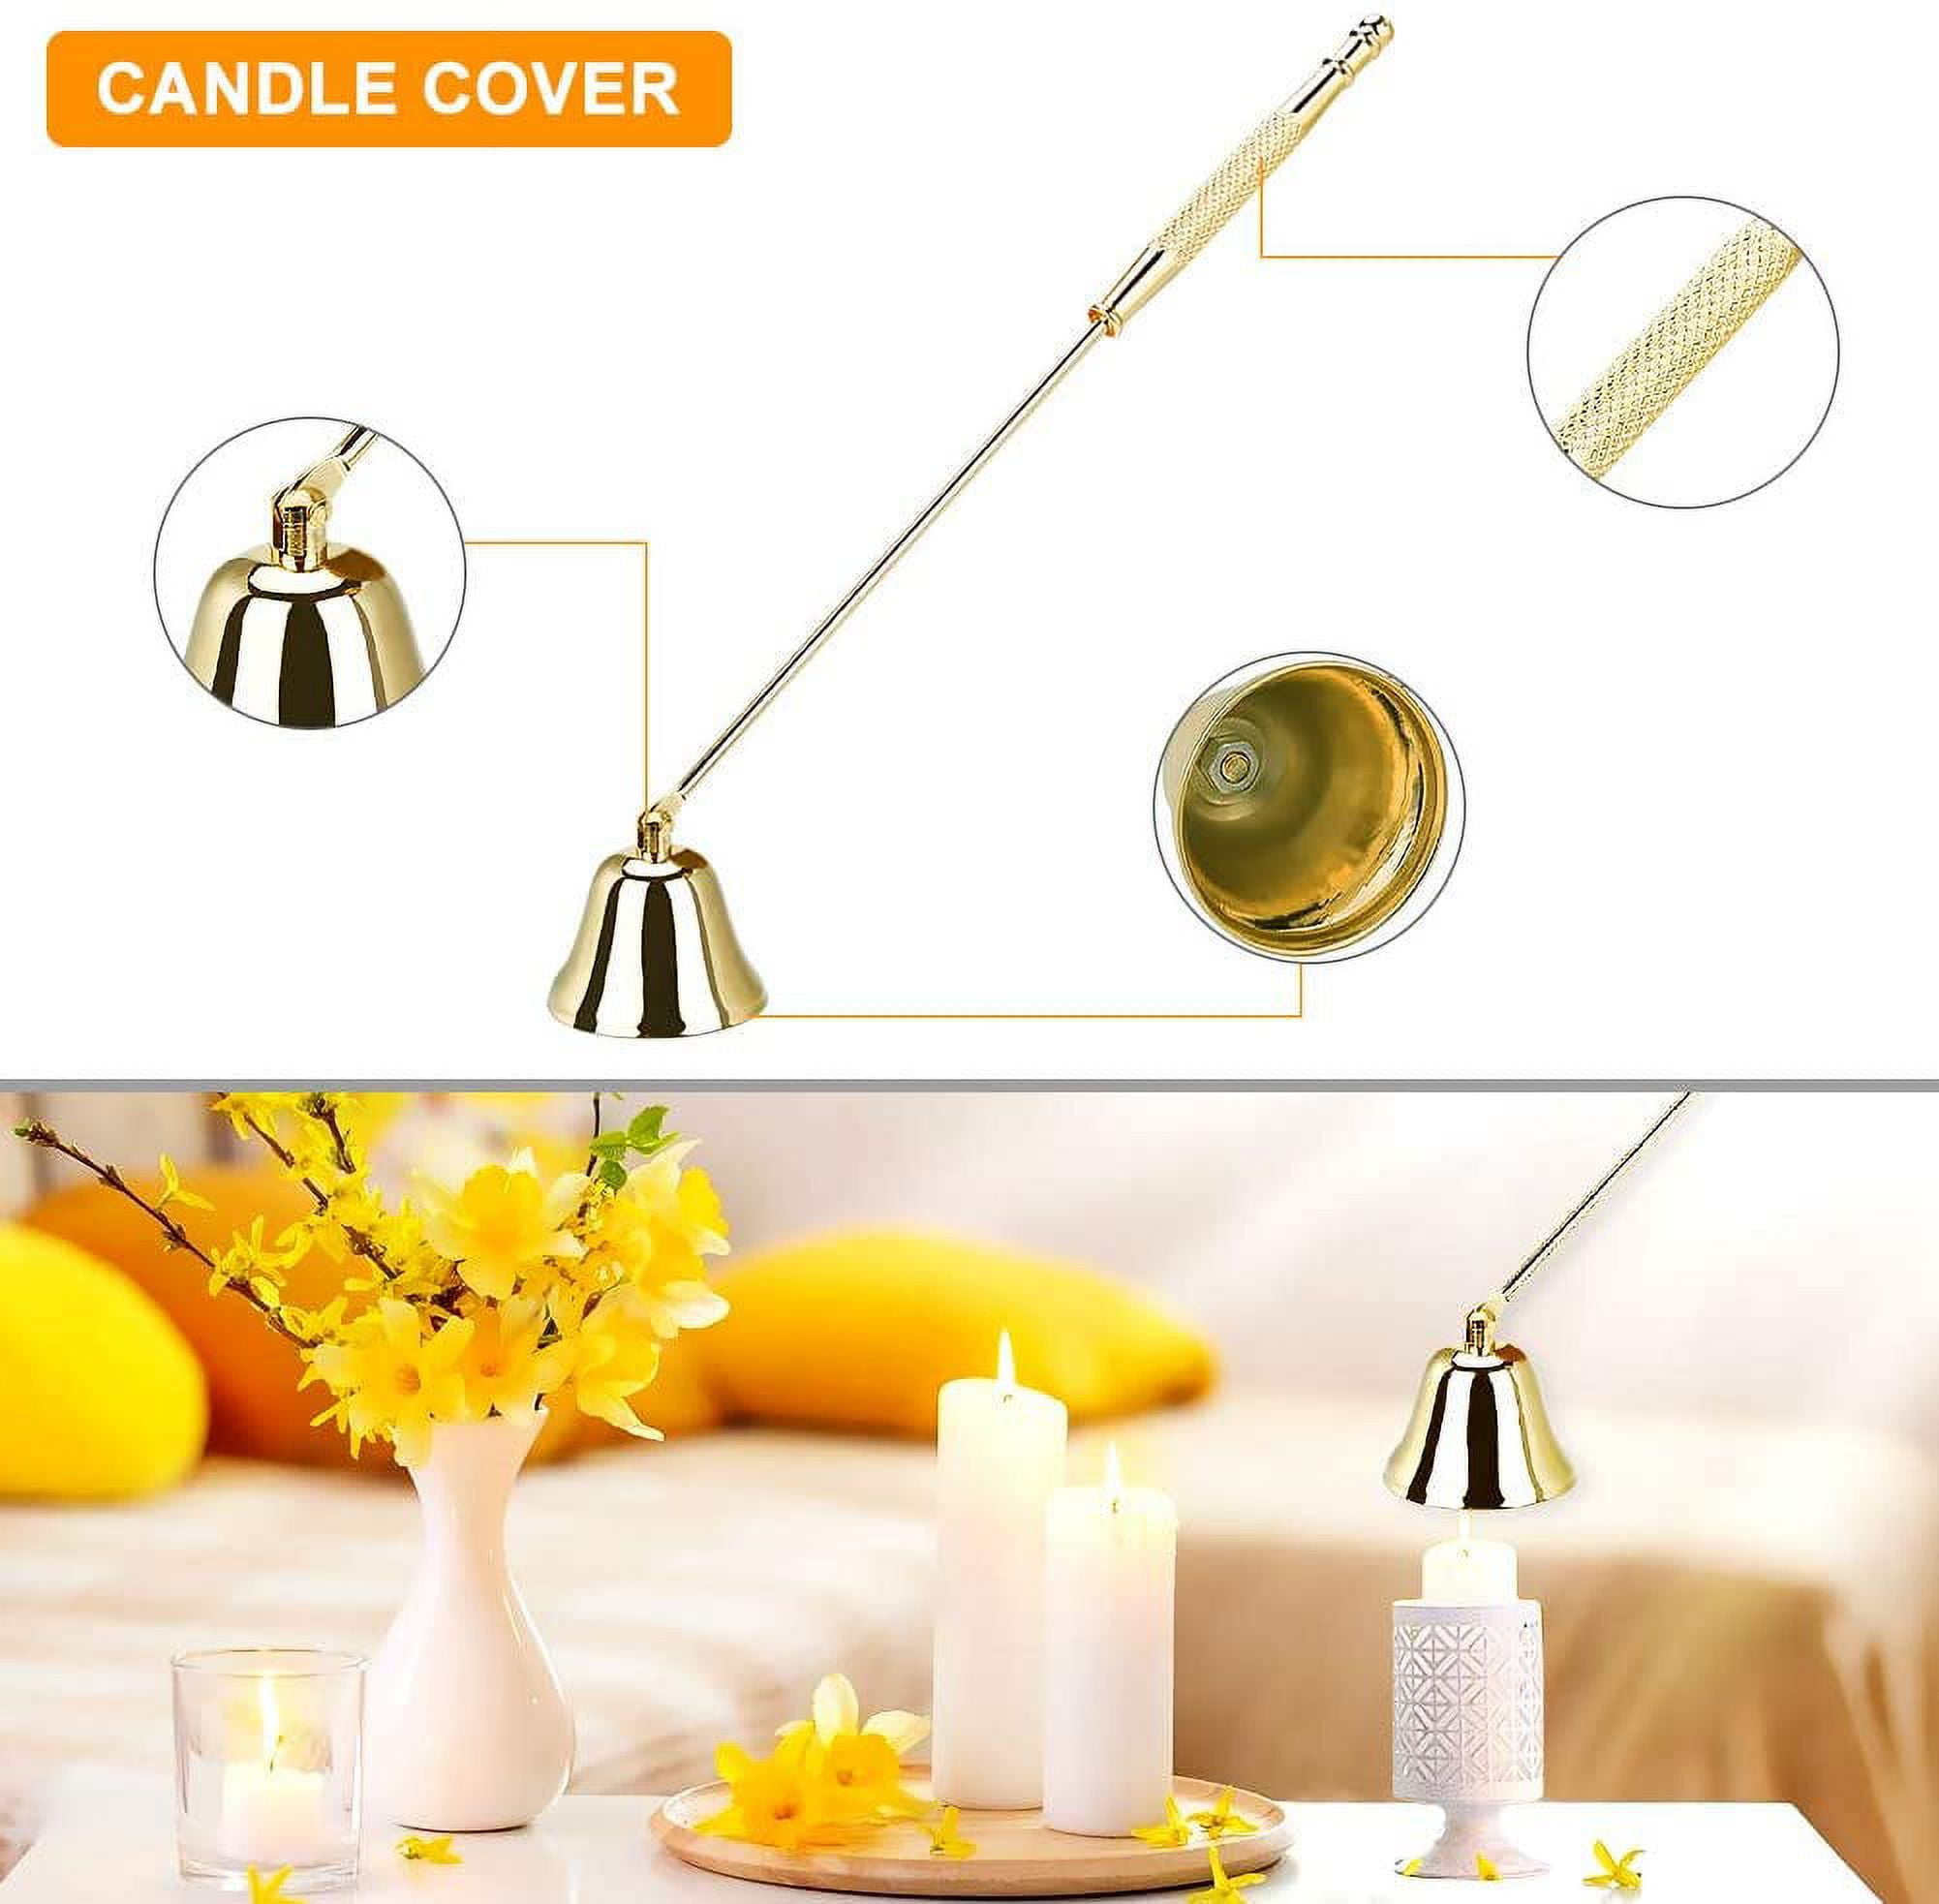 HSP-HSWITI 3 in 1 Candle Wick Trimmer Set, Candle Snuffer & Candle